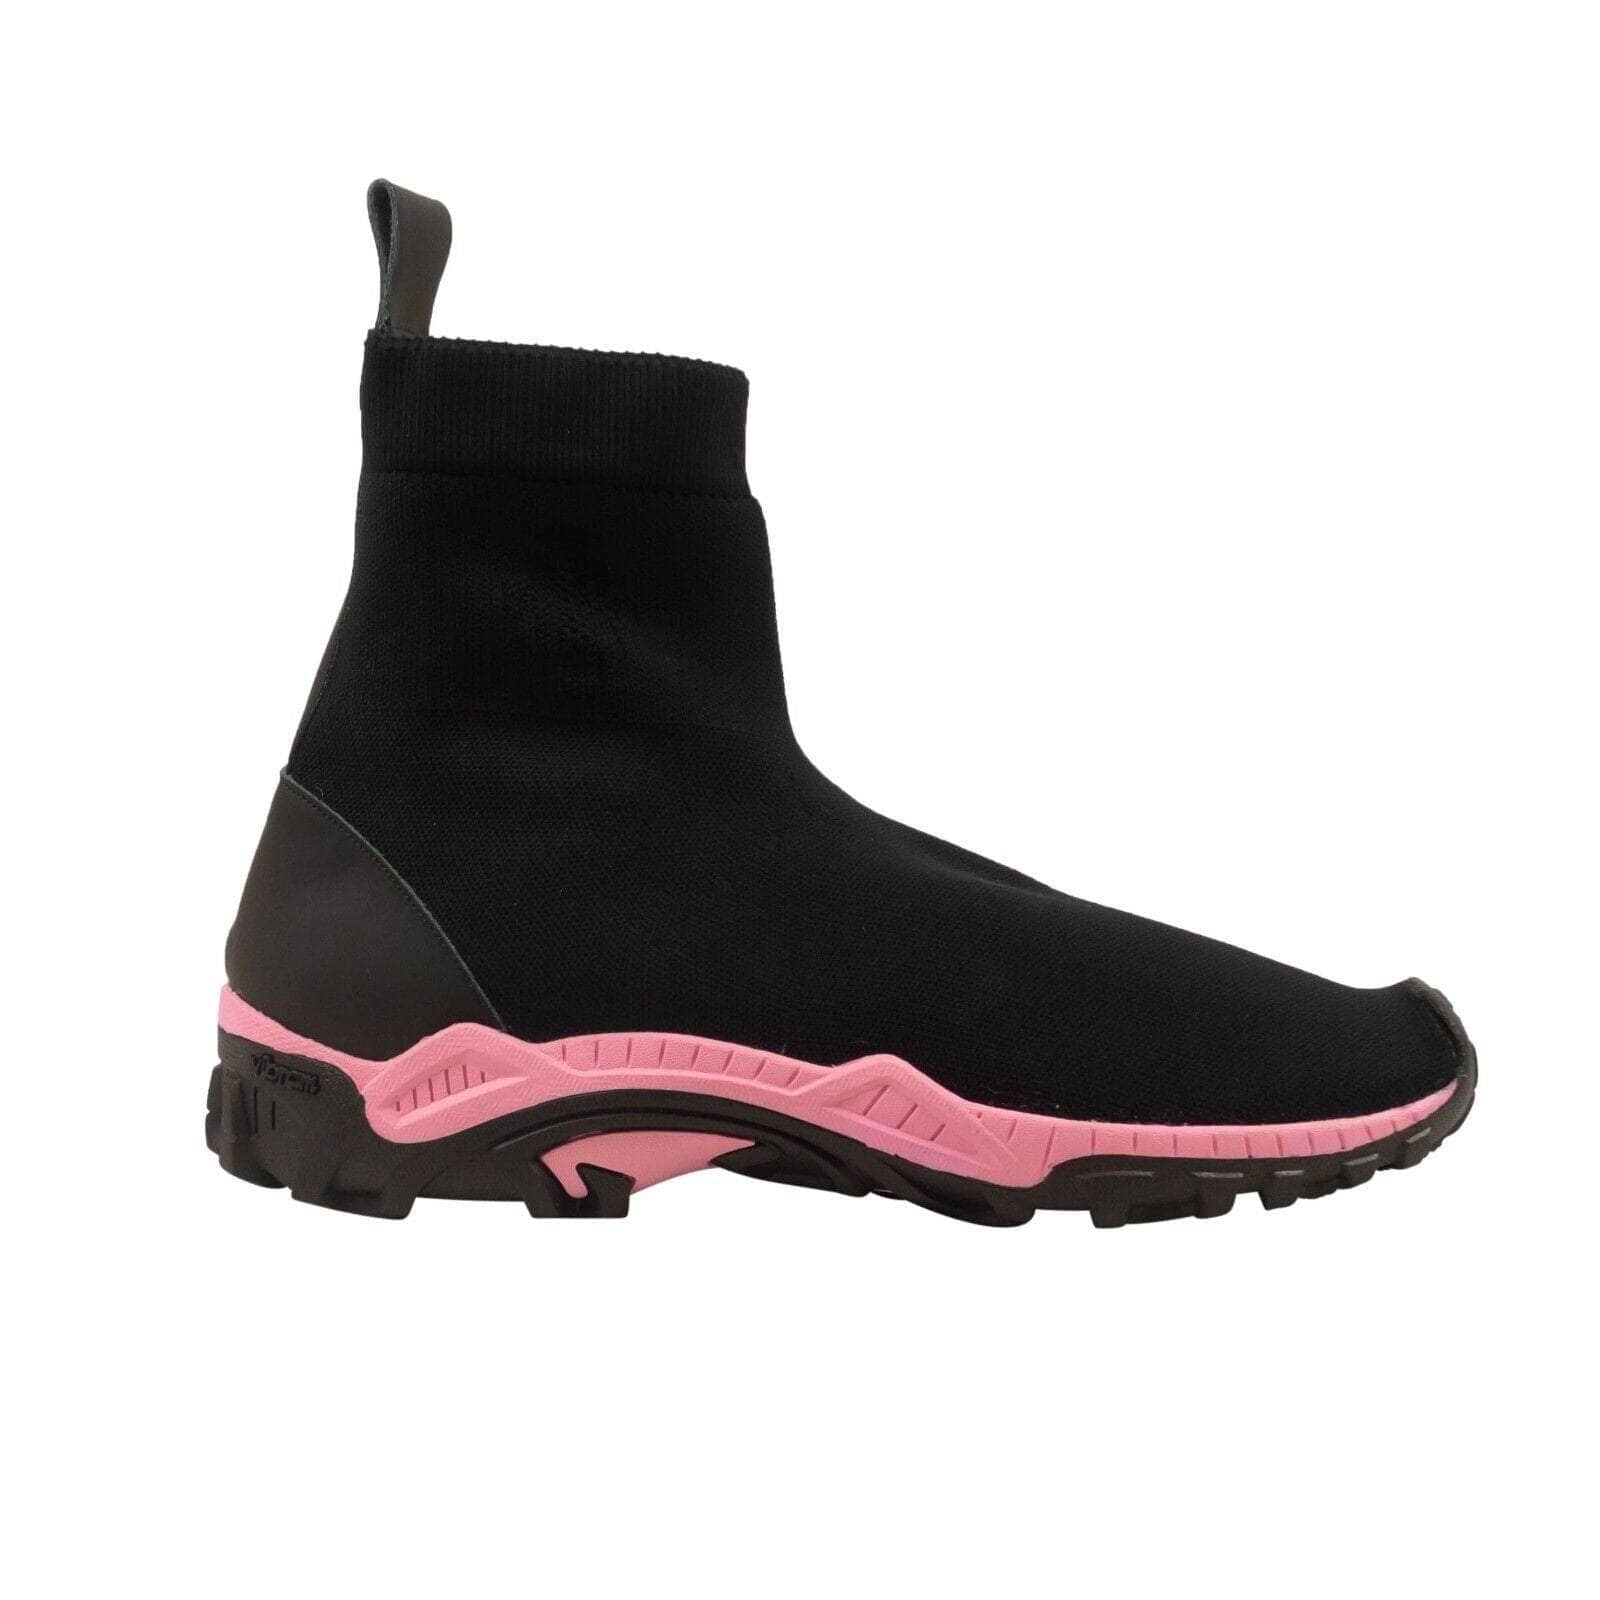 Marcelo Burlon 250-500, channelenable-all, chicmi, couponcollection, gender-mens, main-shoes, marcelo-burlon, mens-ankle-boots, mens-shoes, size-44 44 Black And Pink Flyknit Boots 95-MCB-2004/44 95-MCB-2004/44